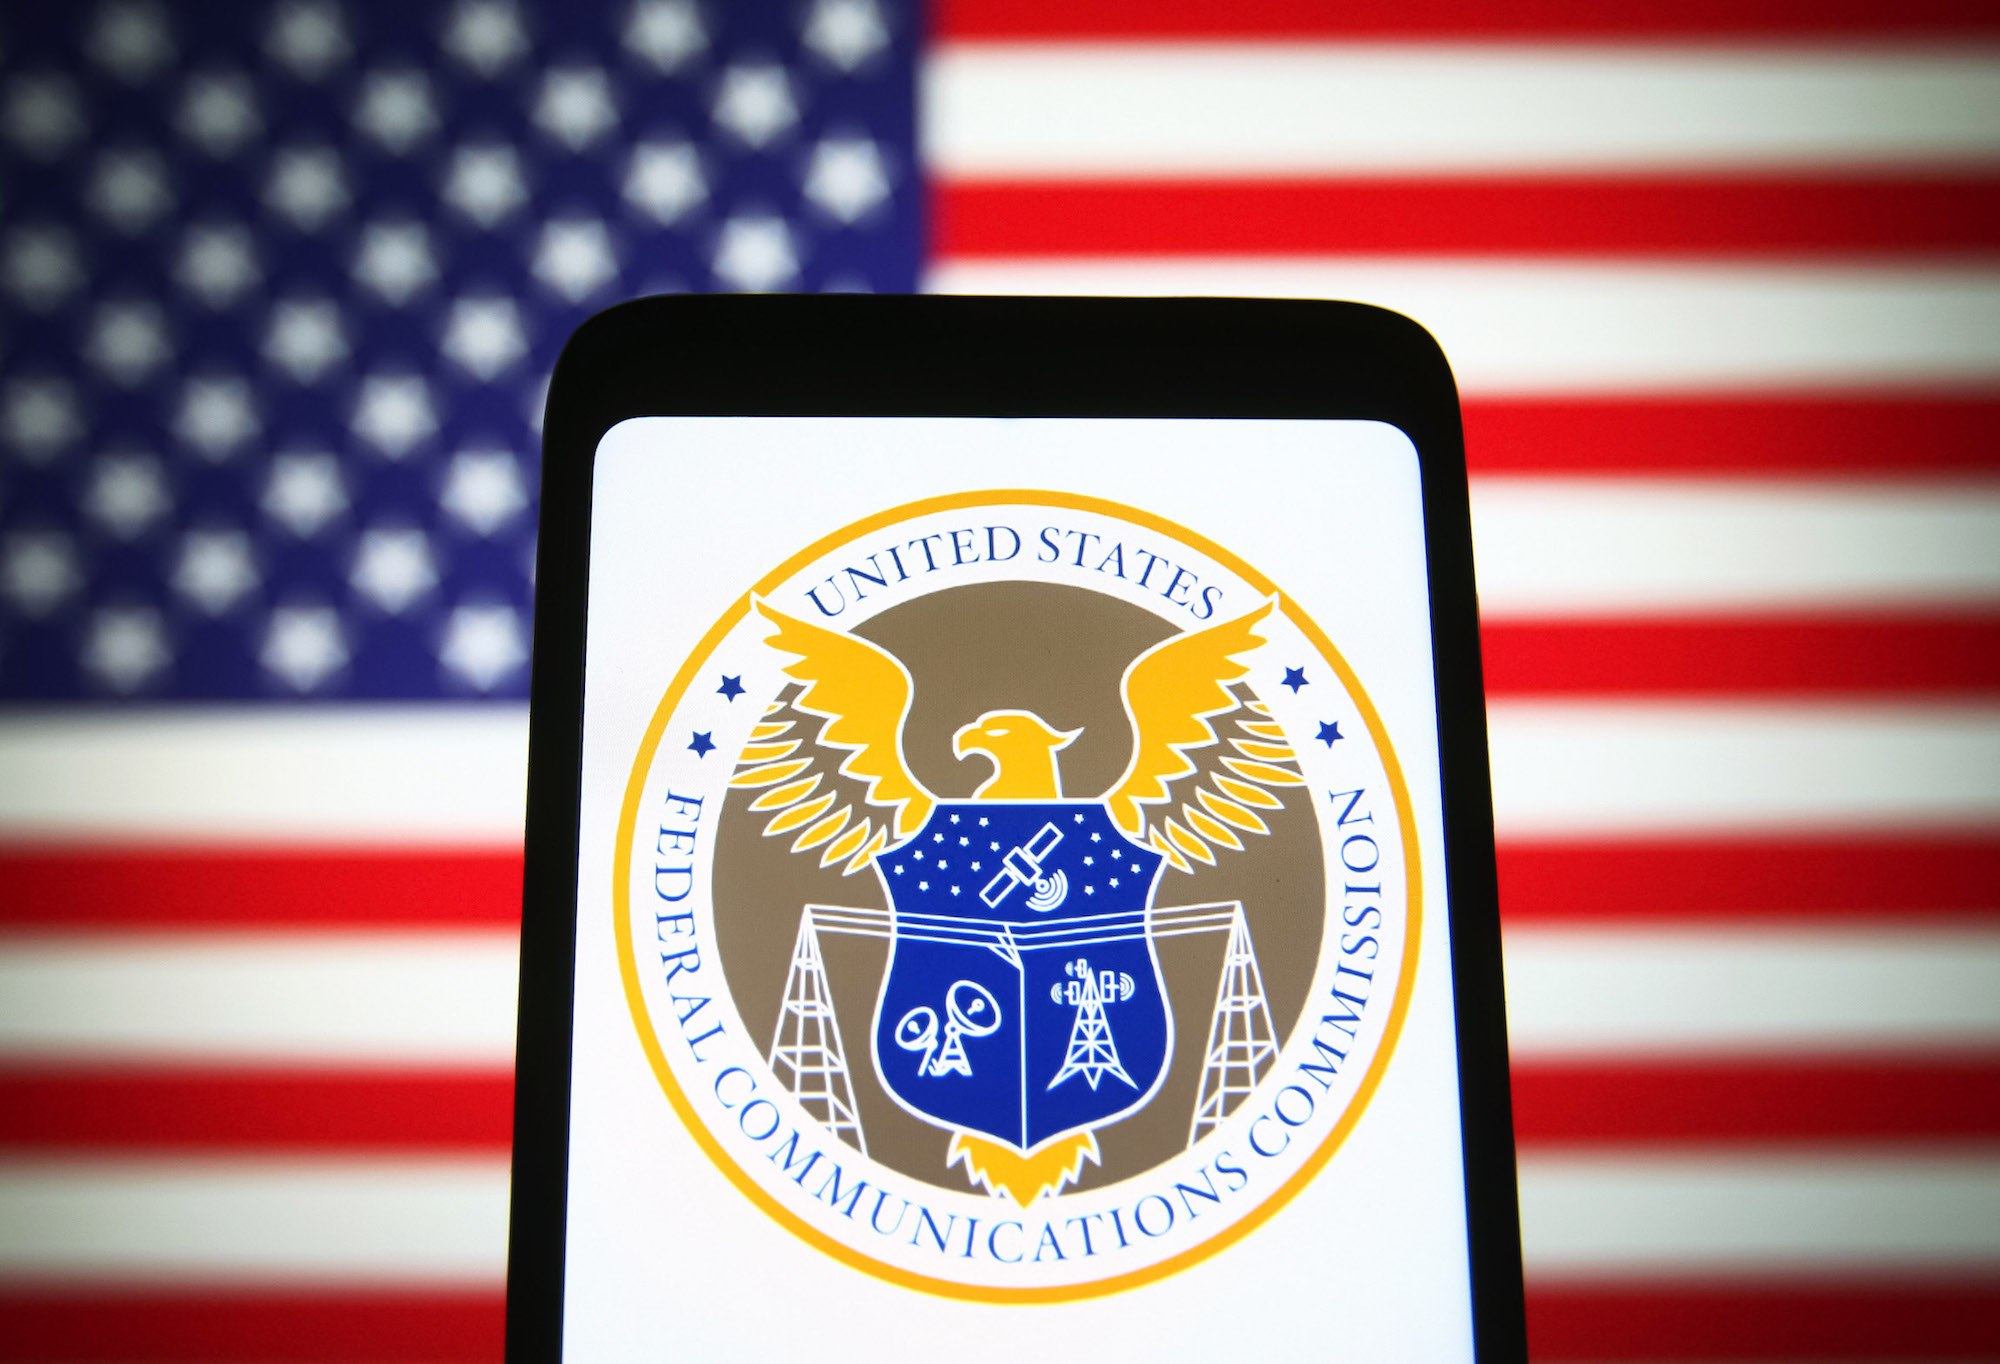 The US Federal Communications Commission (FCC) seal is seen on a smartphone screen with the US flag in the background.